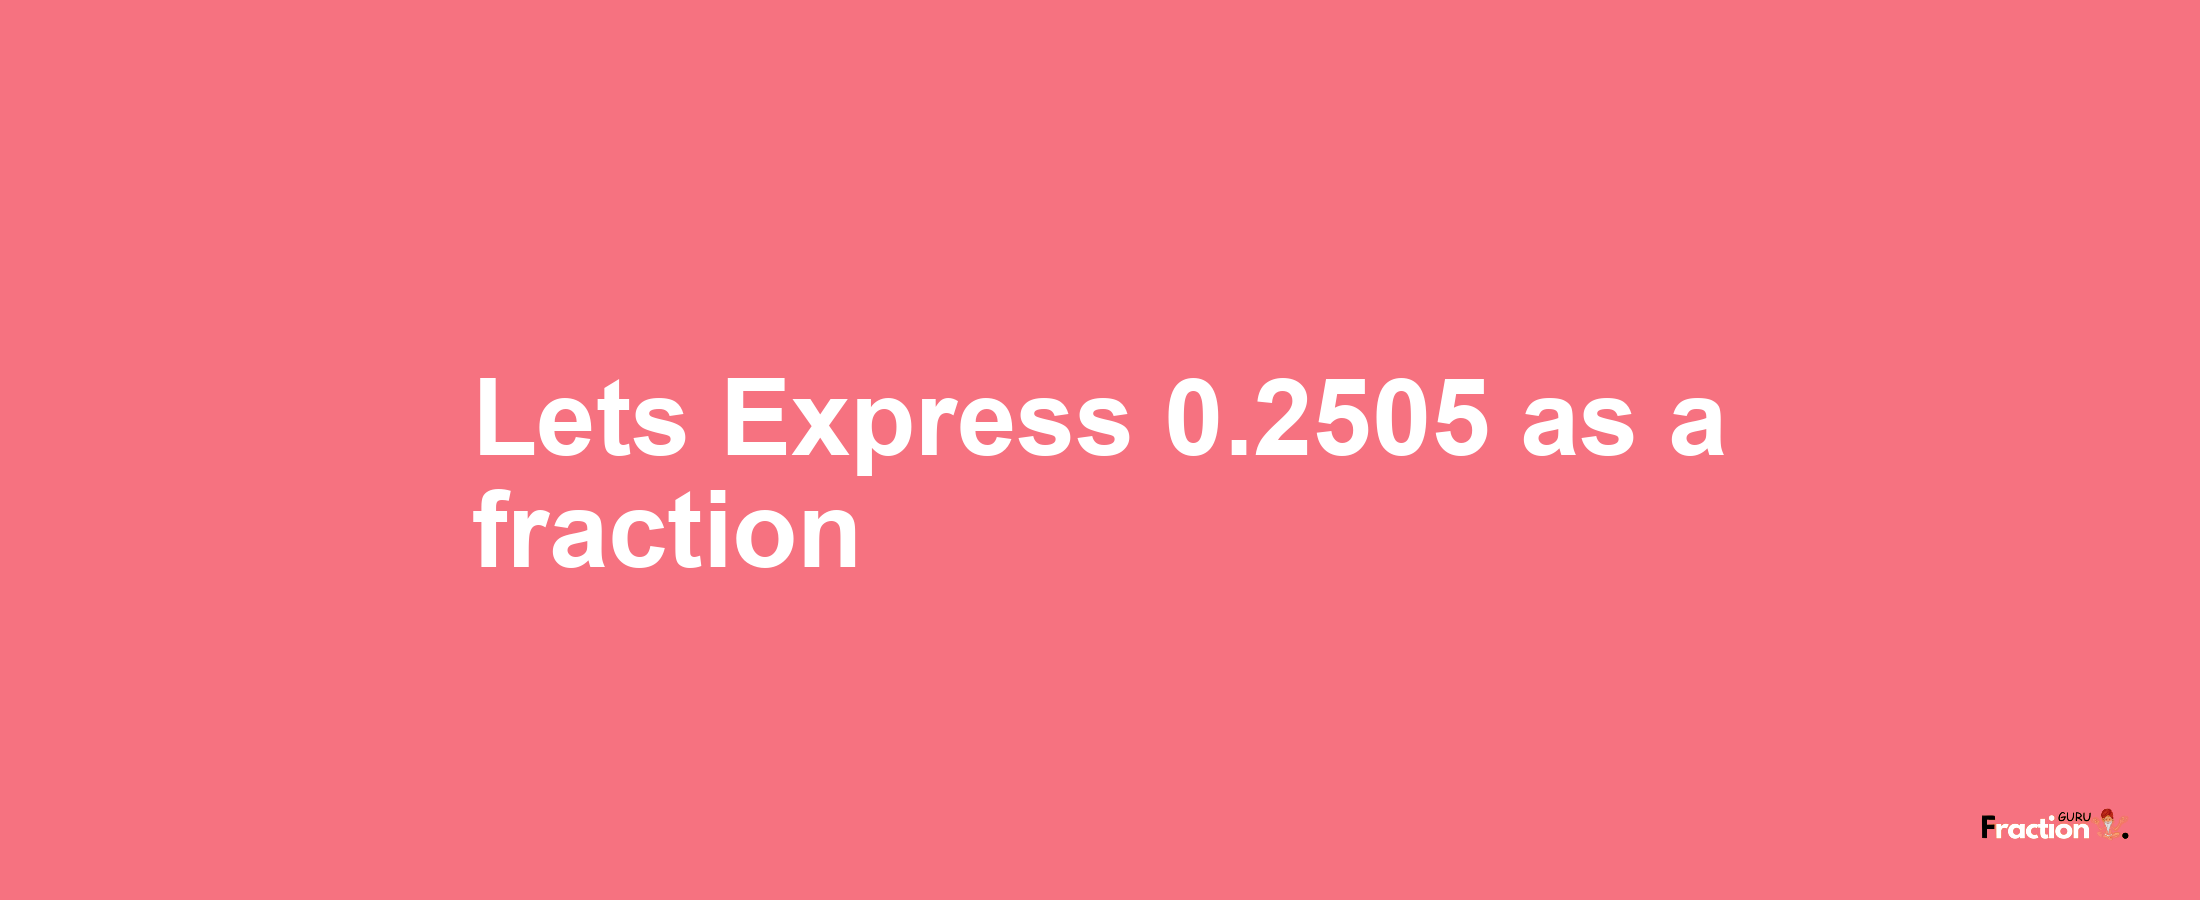 Lets Express 0.2505 as afraction